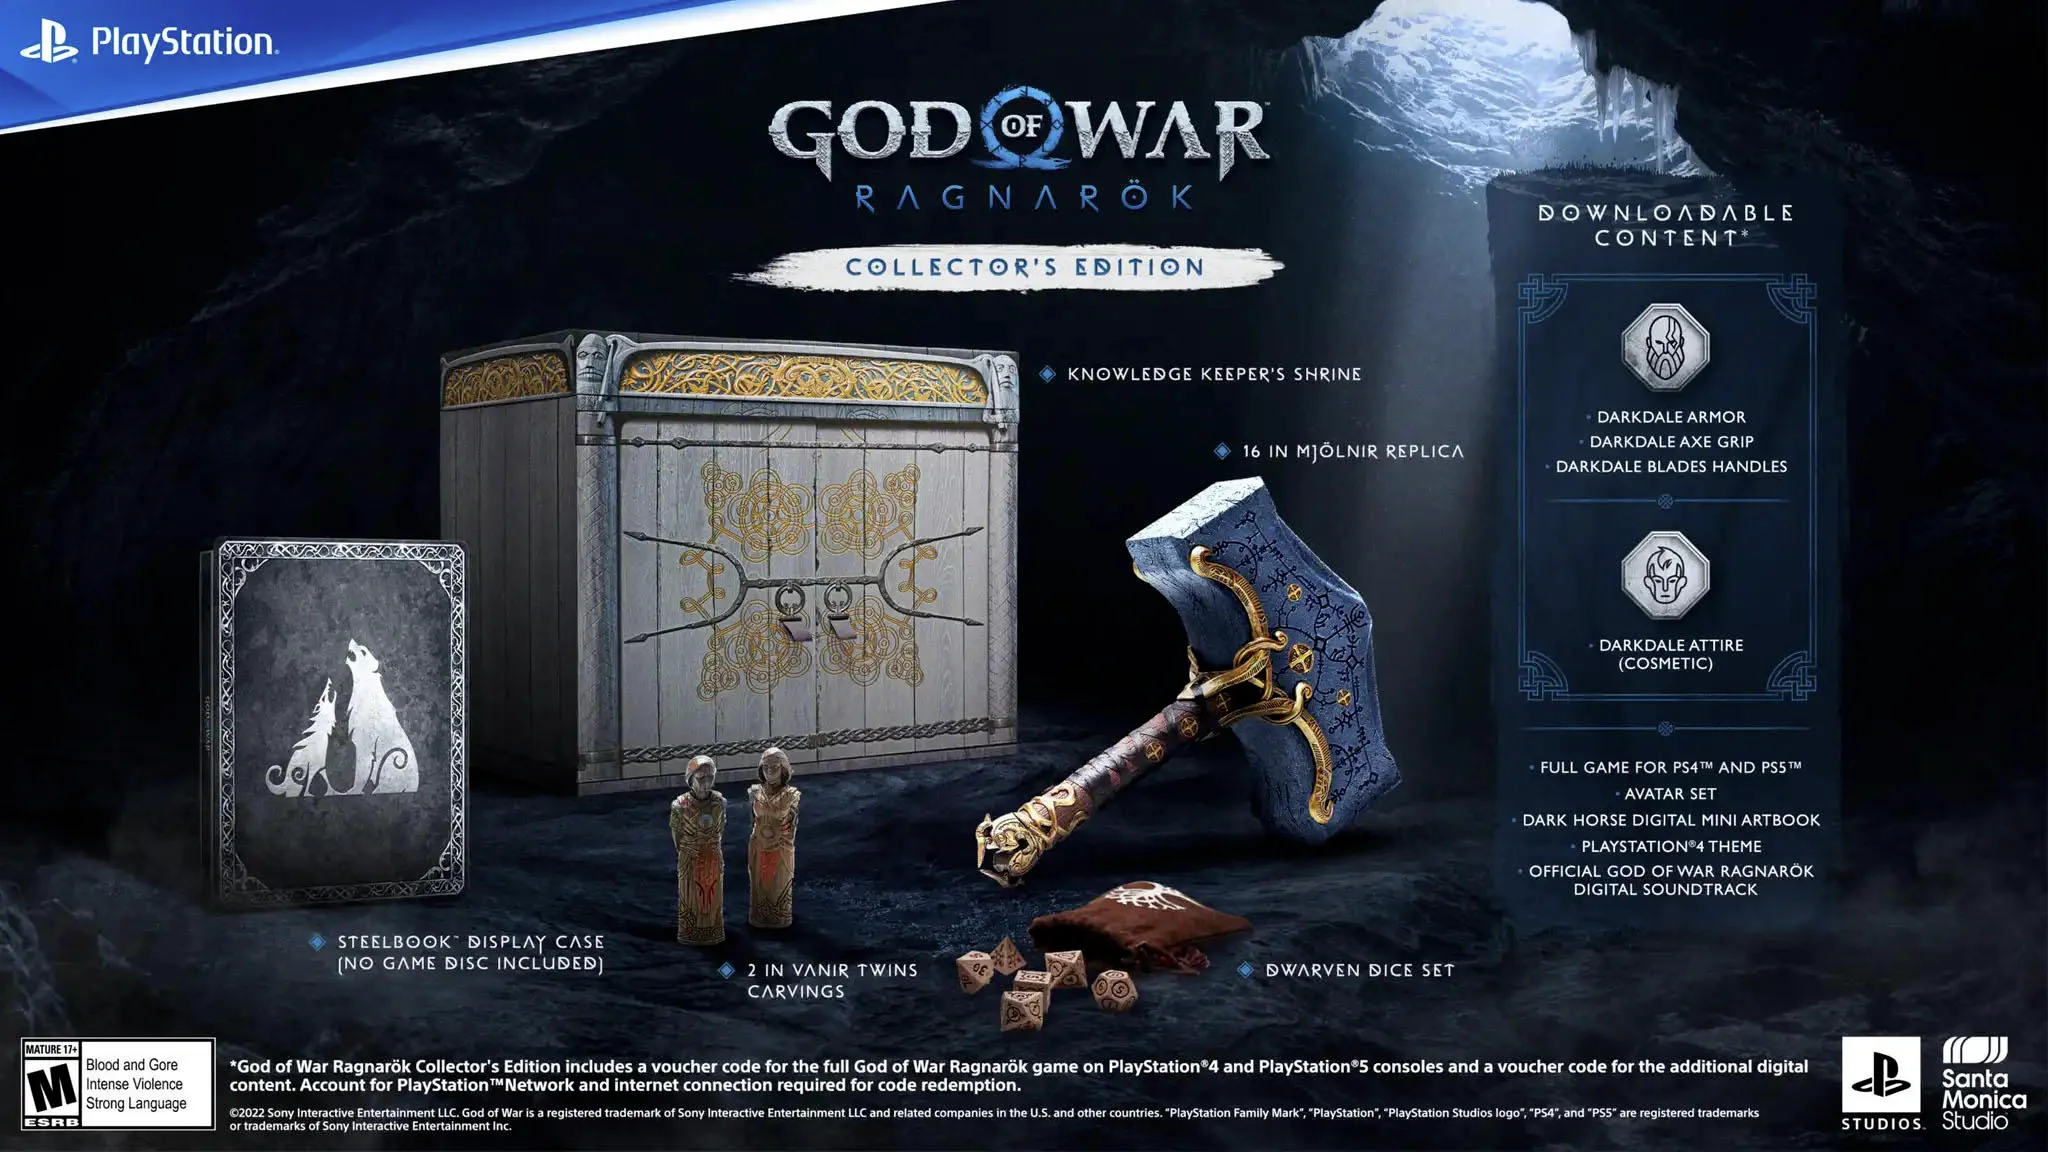 God of War: Ragnarok Collector’s and Jotnar edition Pricing, Where to Order